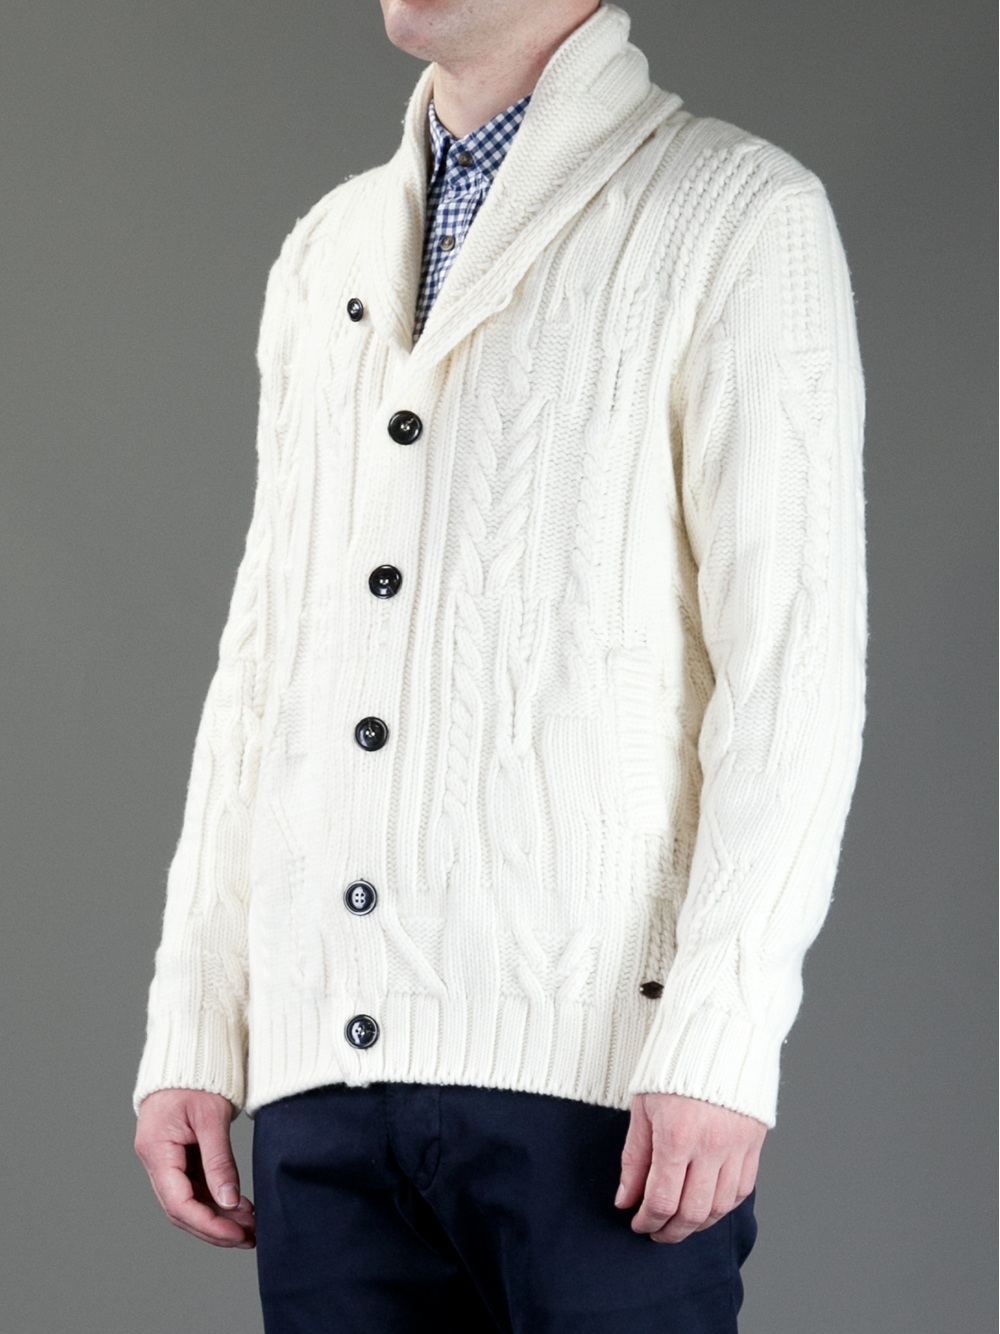 Woolrich Cable Knit Cardigan in White for Men - Lyst